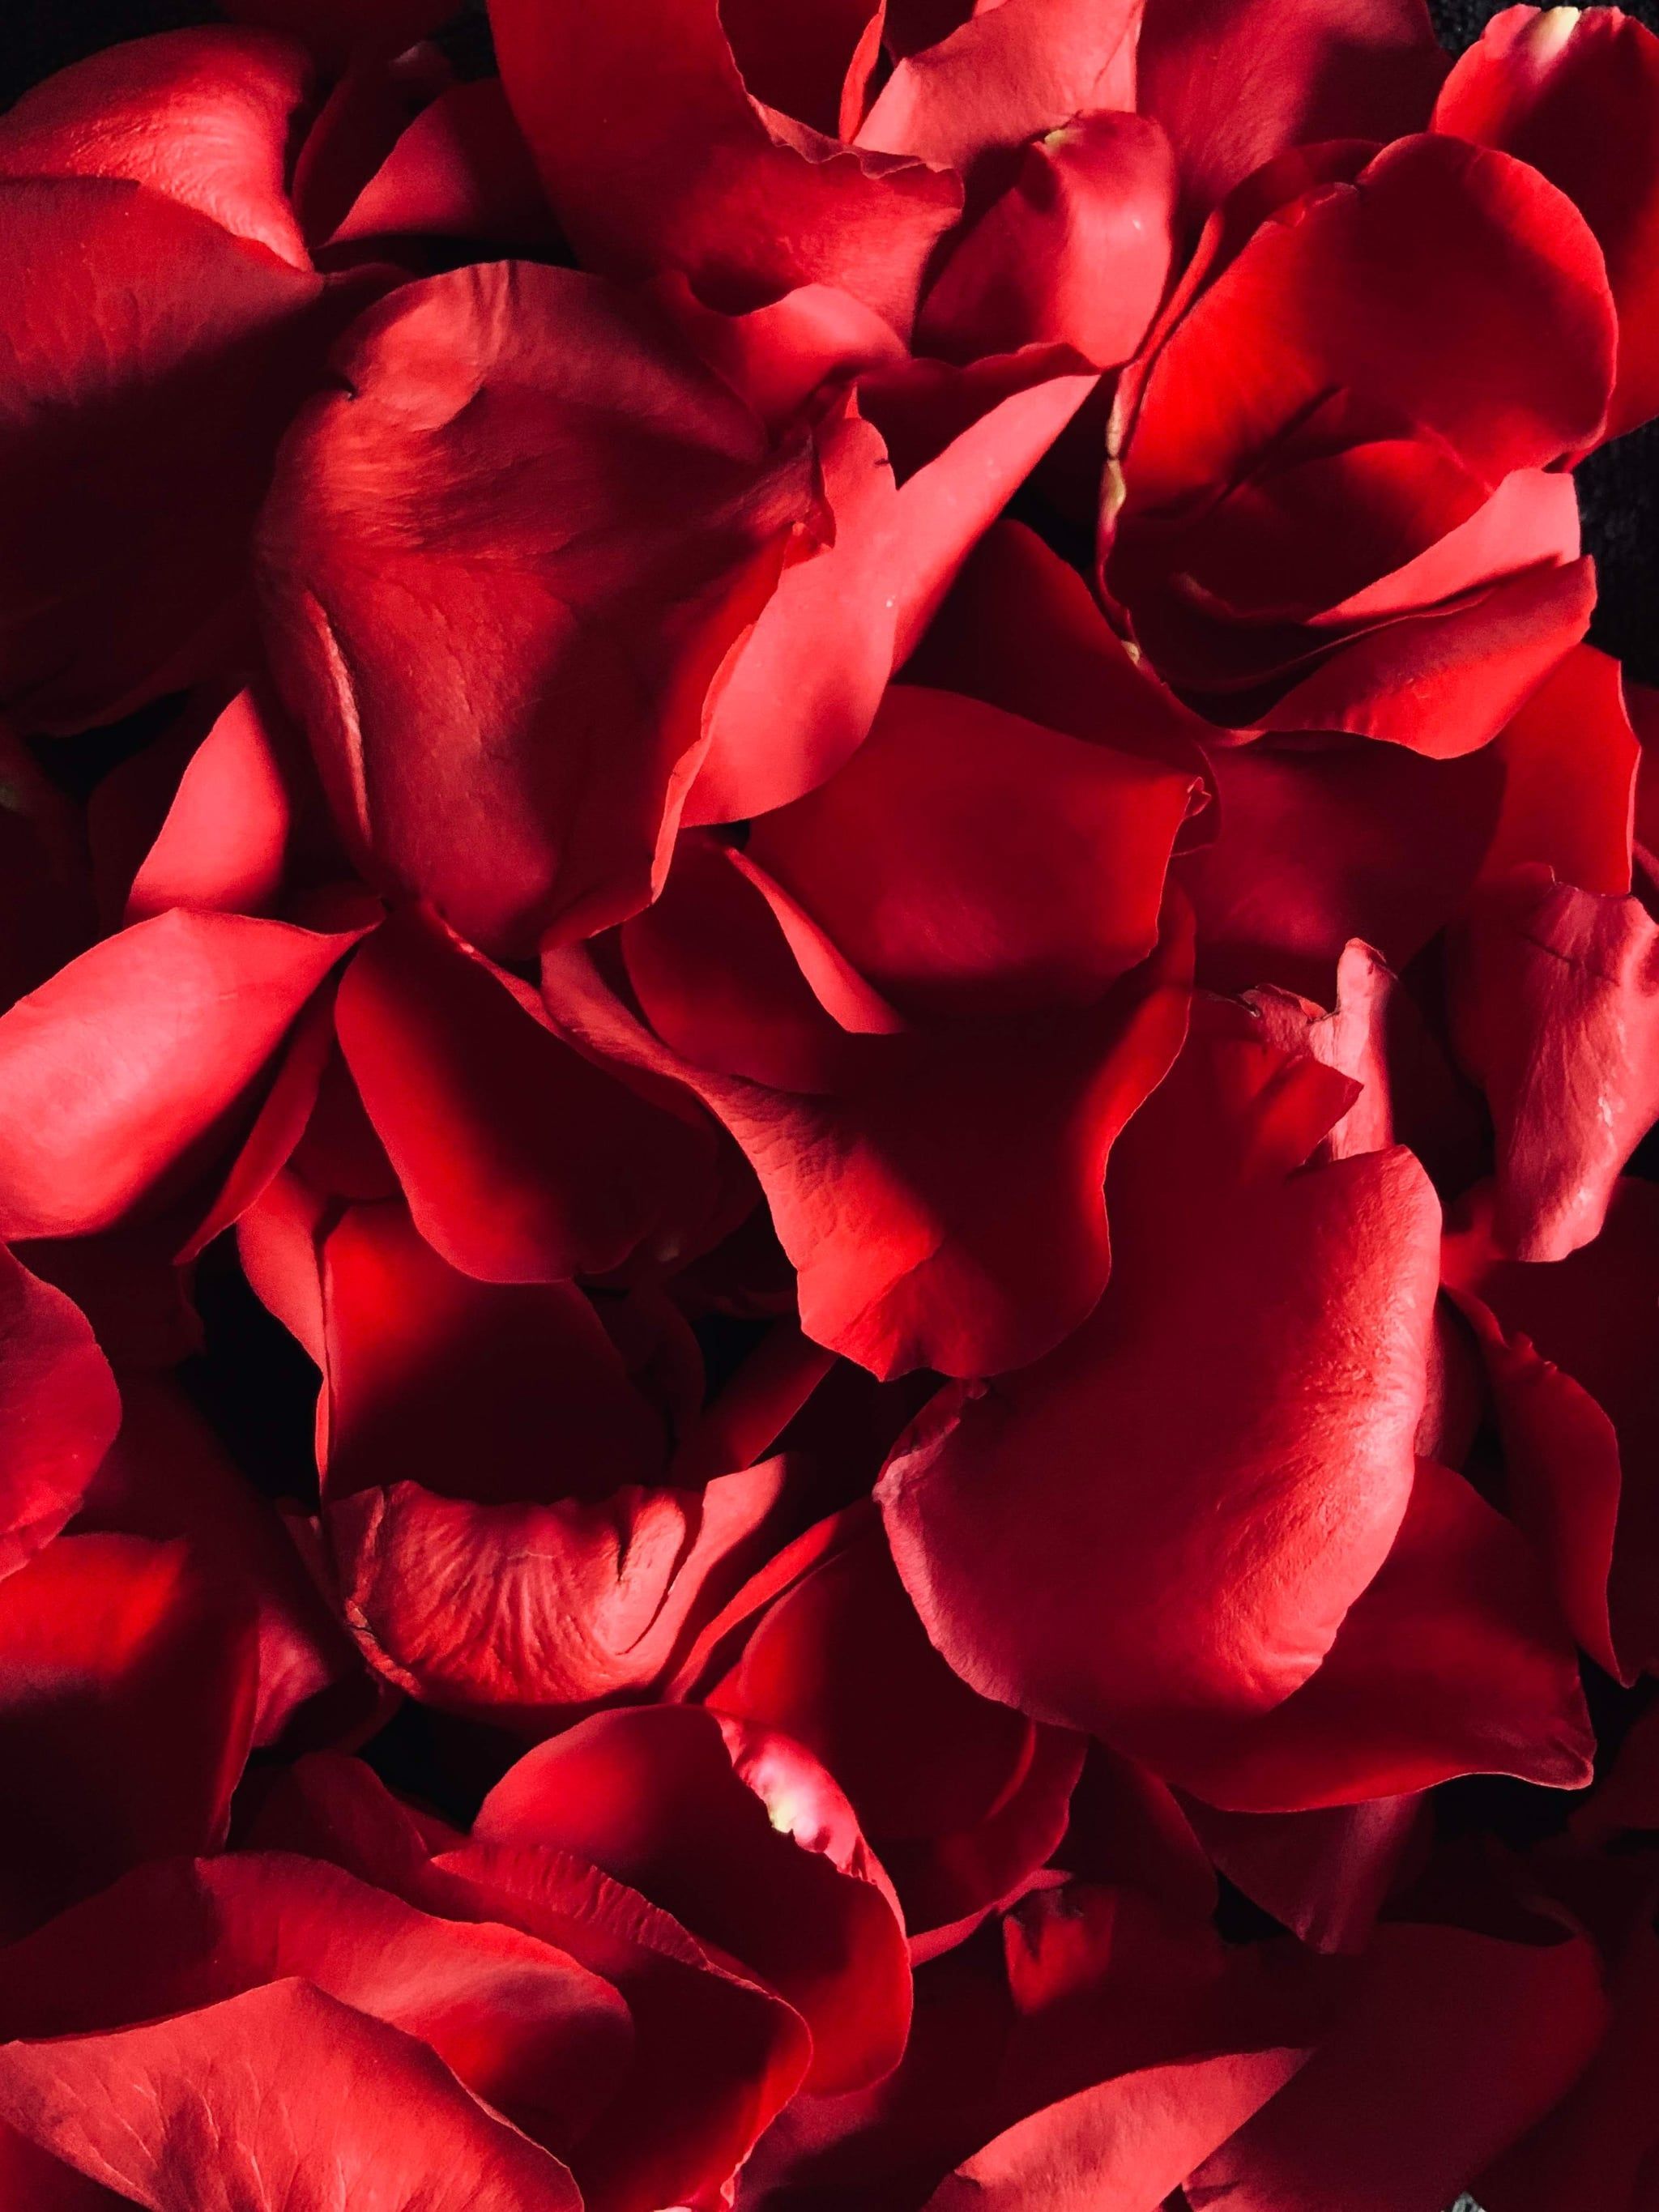 Valentine's Day Wallpaper: Red Rose Petals. The Dreamiest iPhone Wallpaper For Valentine's Day That Fit Any Aesthetic